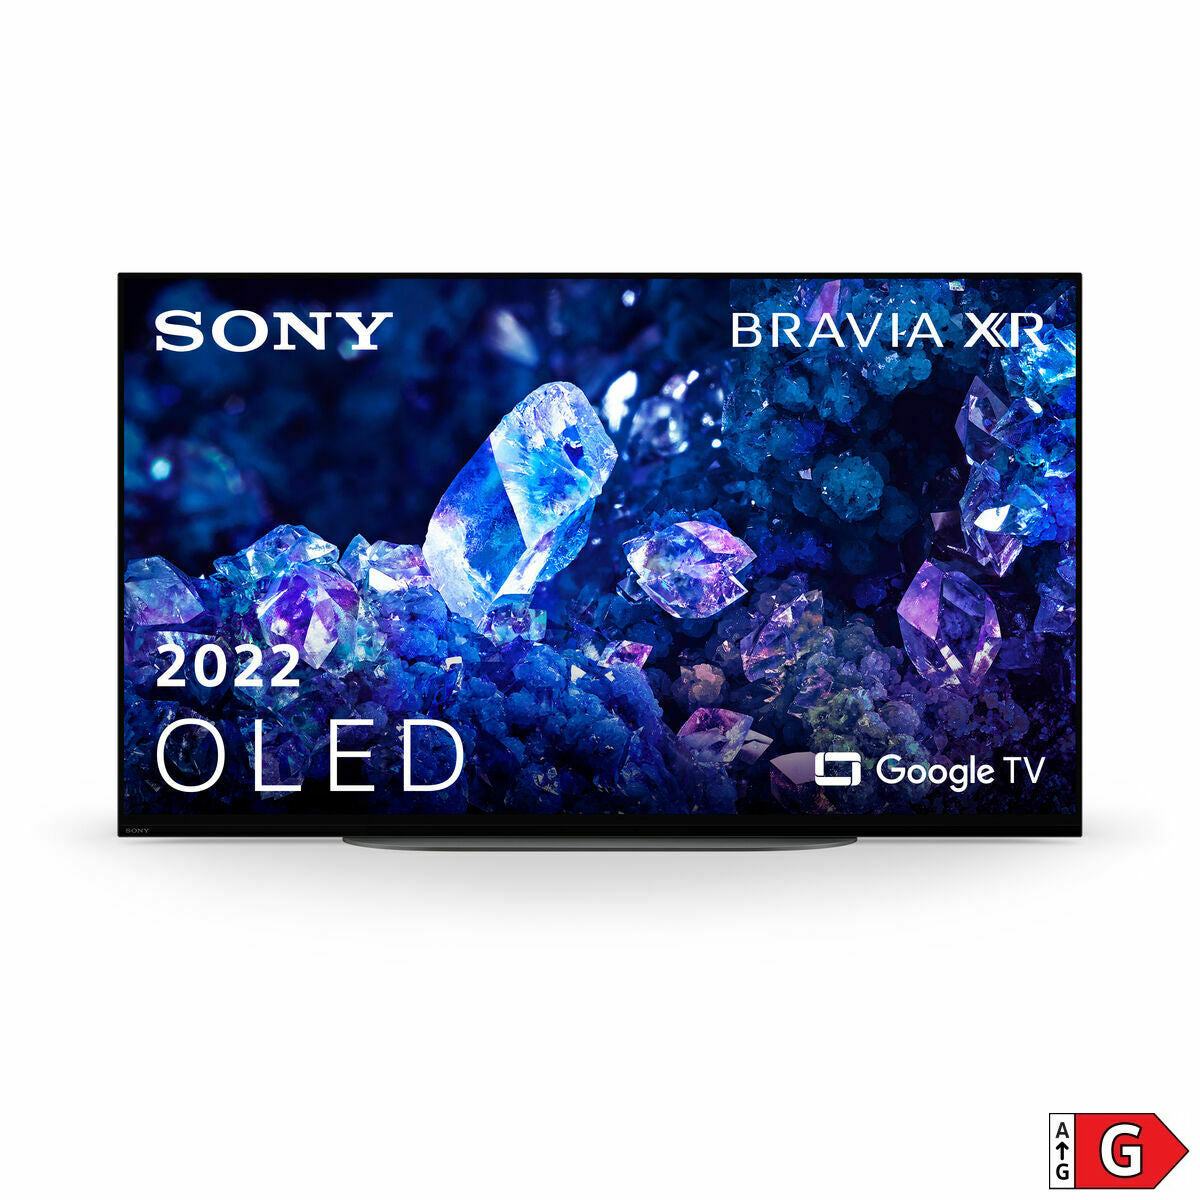 Smart TV Sony XR48A90K 48" 4K ULTRA HD OLED WIFI 4K Ultra HD OLED 48", Sony, Electronics, TV, Video and home cinema, smart-tv-sony-xr48a90k-48-4k-ultra-hd-oled-wifi-4k-ultra-hd-oled-48, Brand_Sony, category-reference-2609, category-reference-2625, category-reference-2931, category-reference-t-18805, category-reference-t-19653, cinema and television, Condition_NEW, entertainment, Price_+ 1000, RiotNook